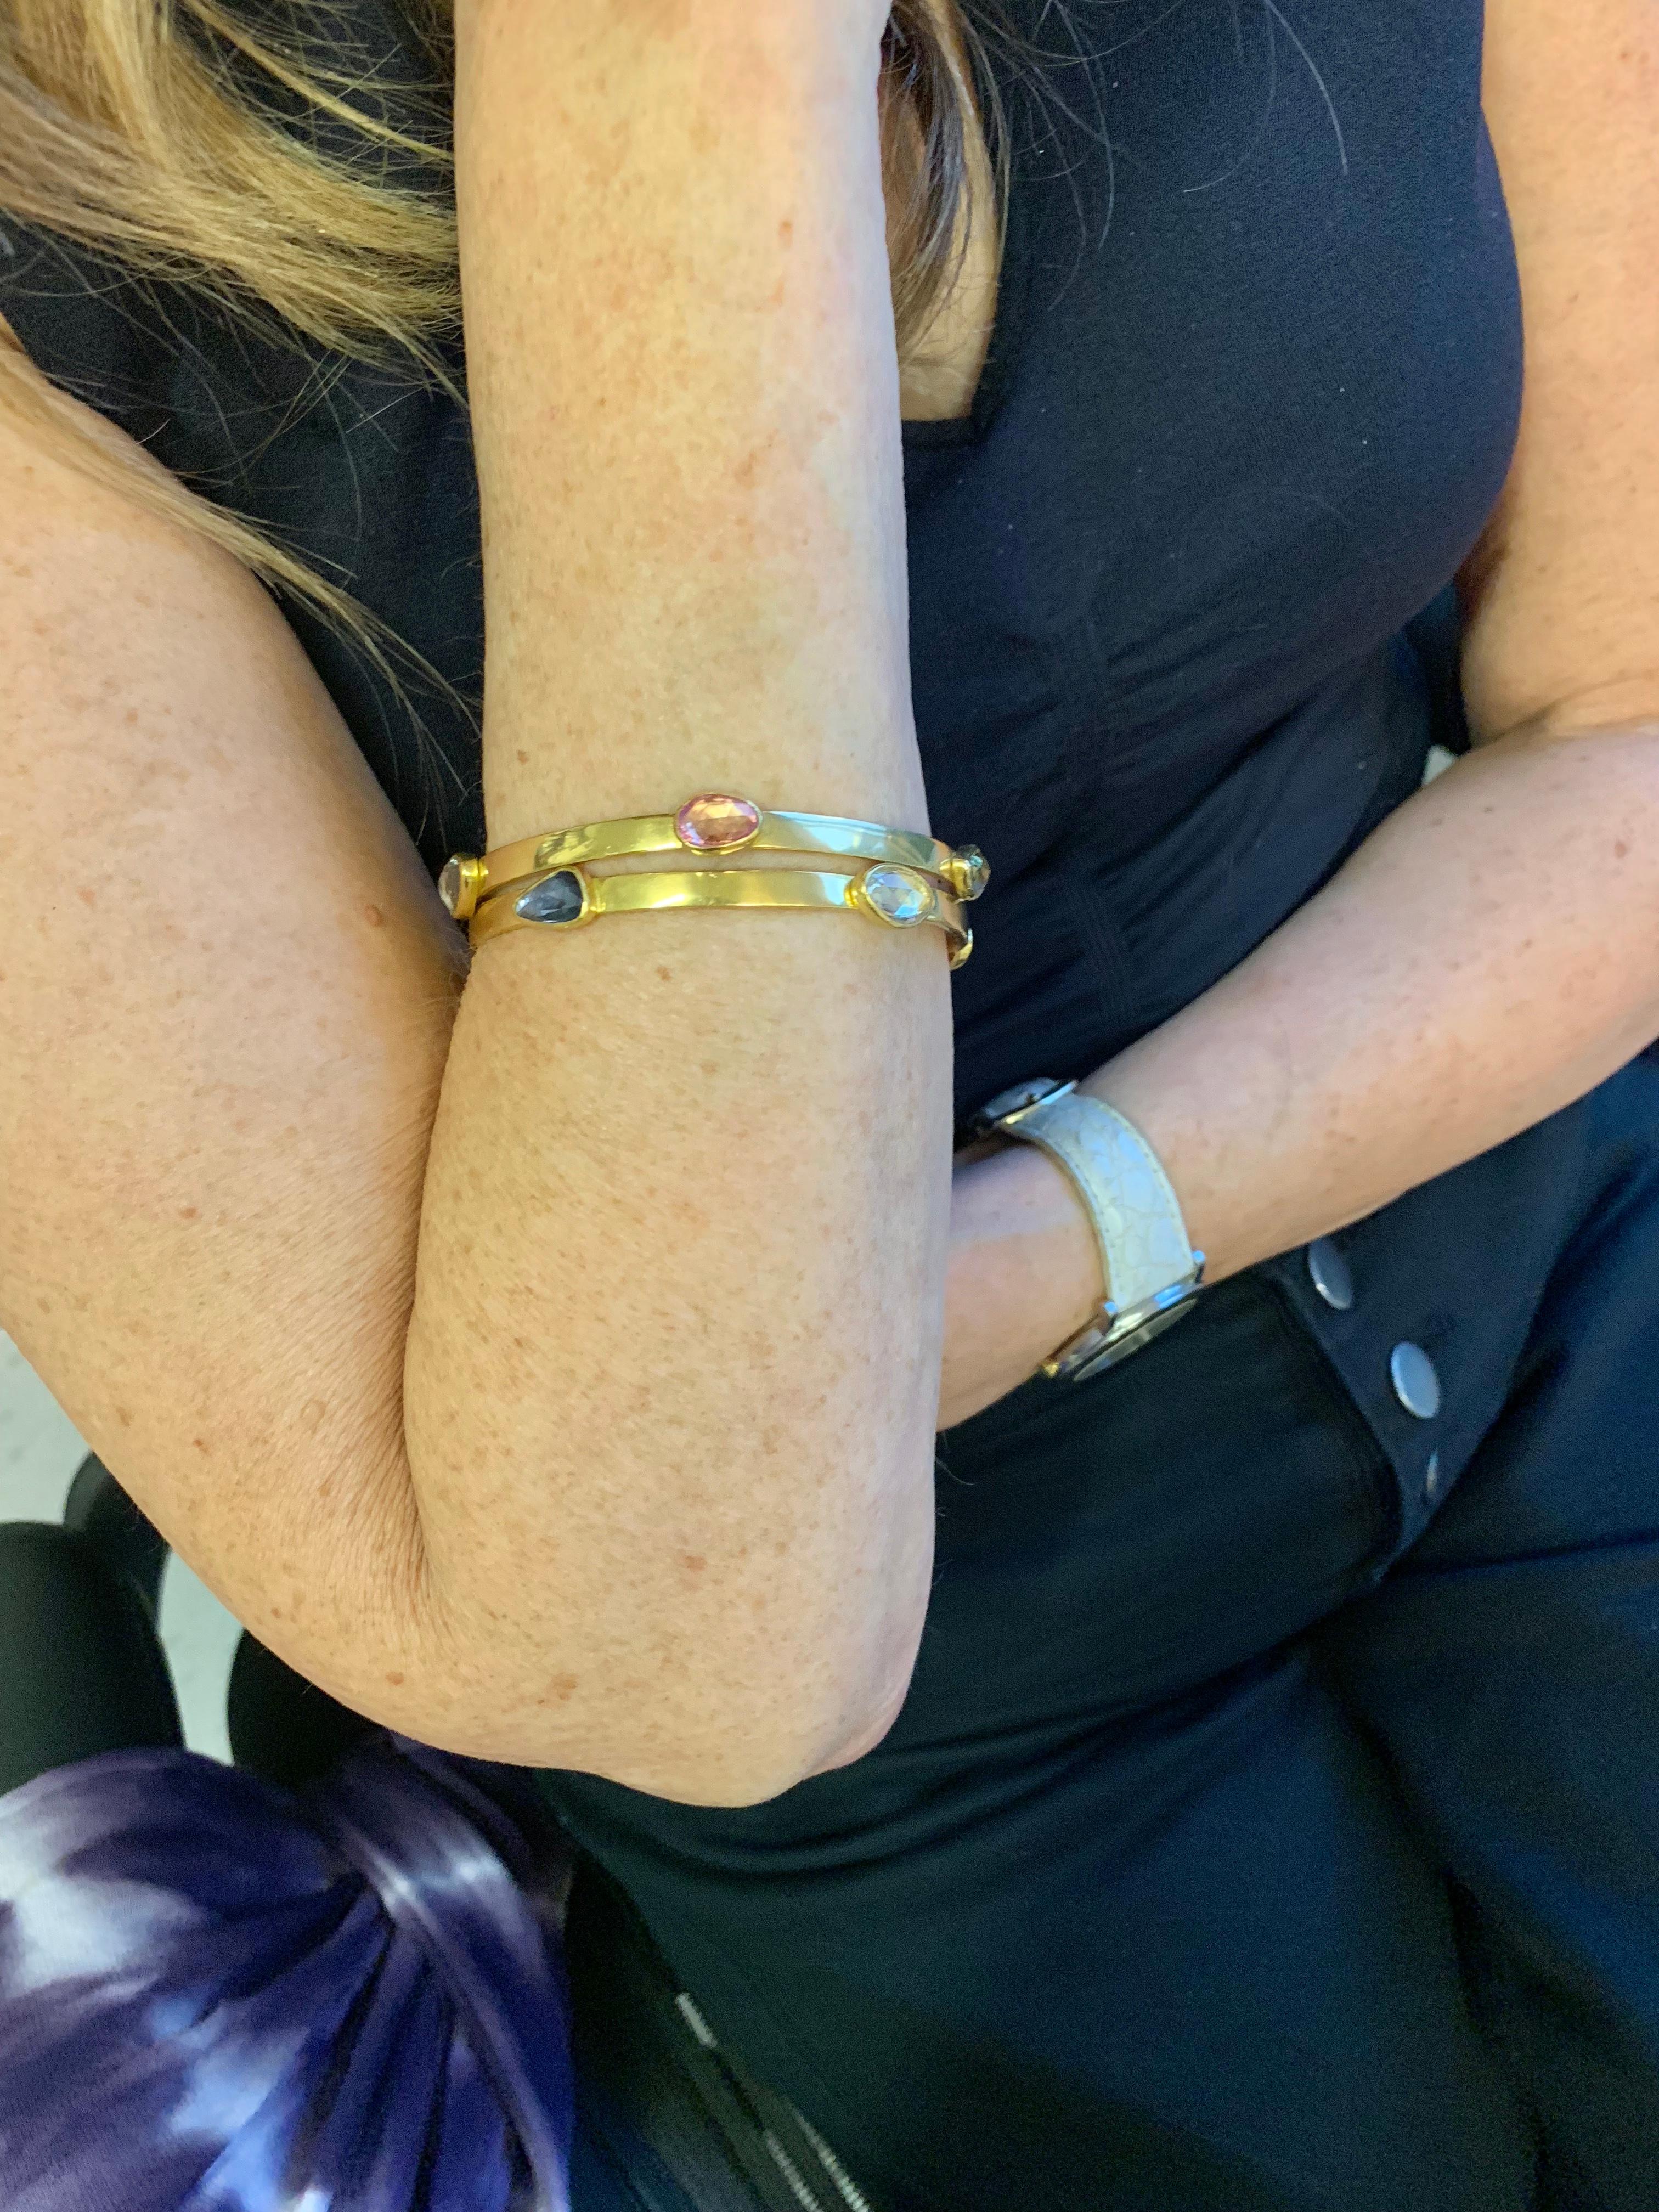 2 Bangle bracelets in 22 Karat gold set with multi colored rose cut Sapphires & 1 Ruby.  weighing individually  9.30 carats for the all Sapphire bangle and 9.70 carats for the bangle with Ruby.
Each bracelet weighing 32 grams or 1 troy ounce.
These